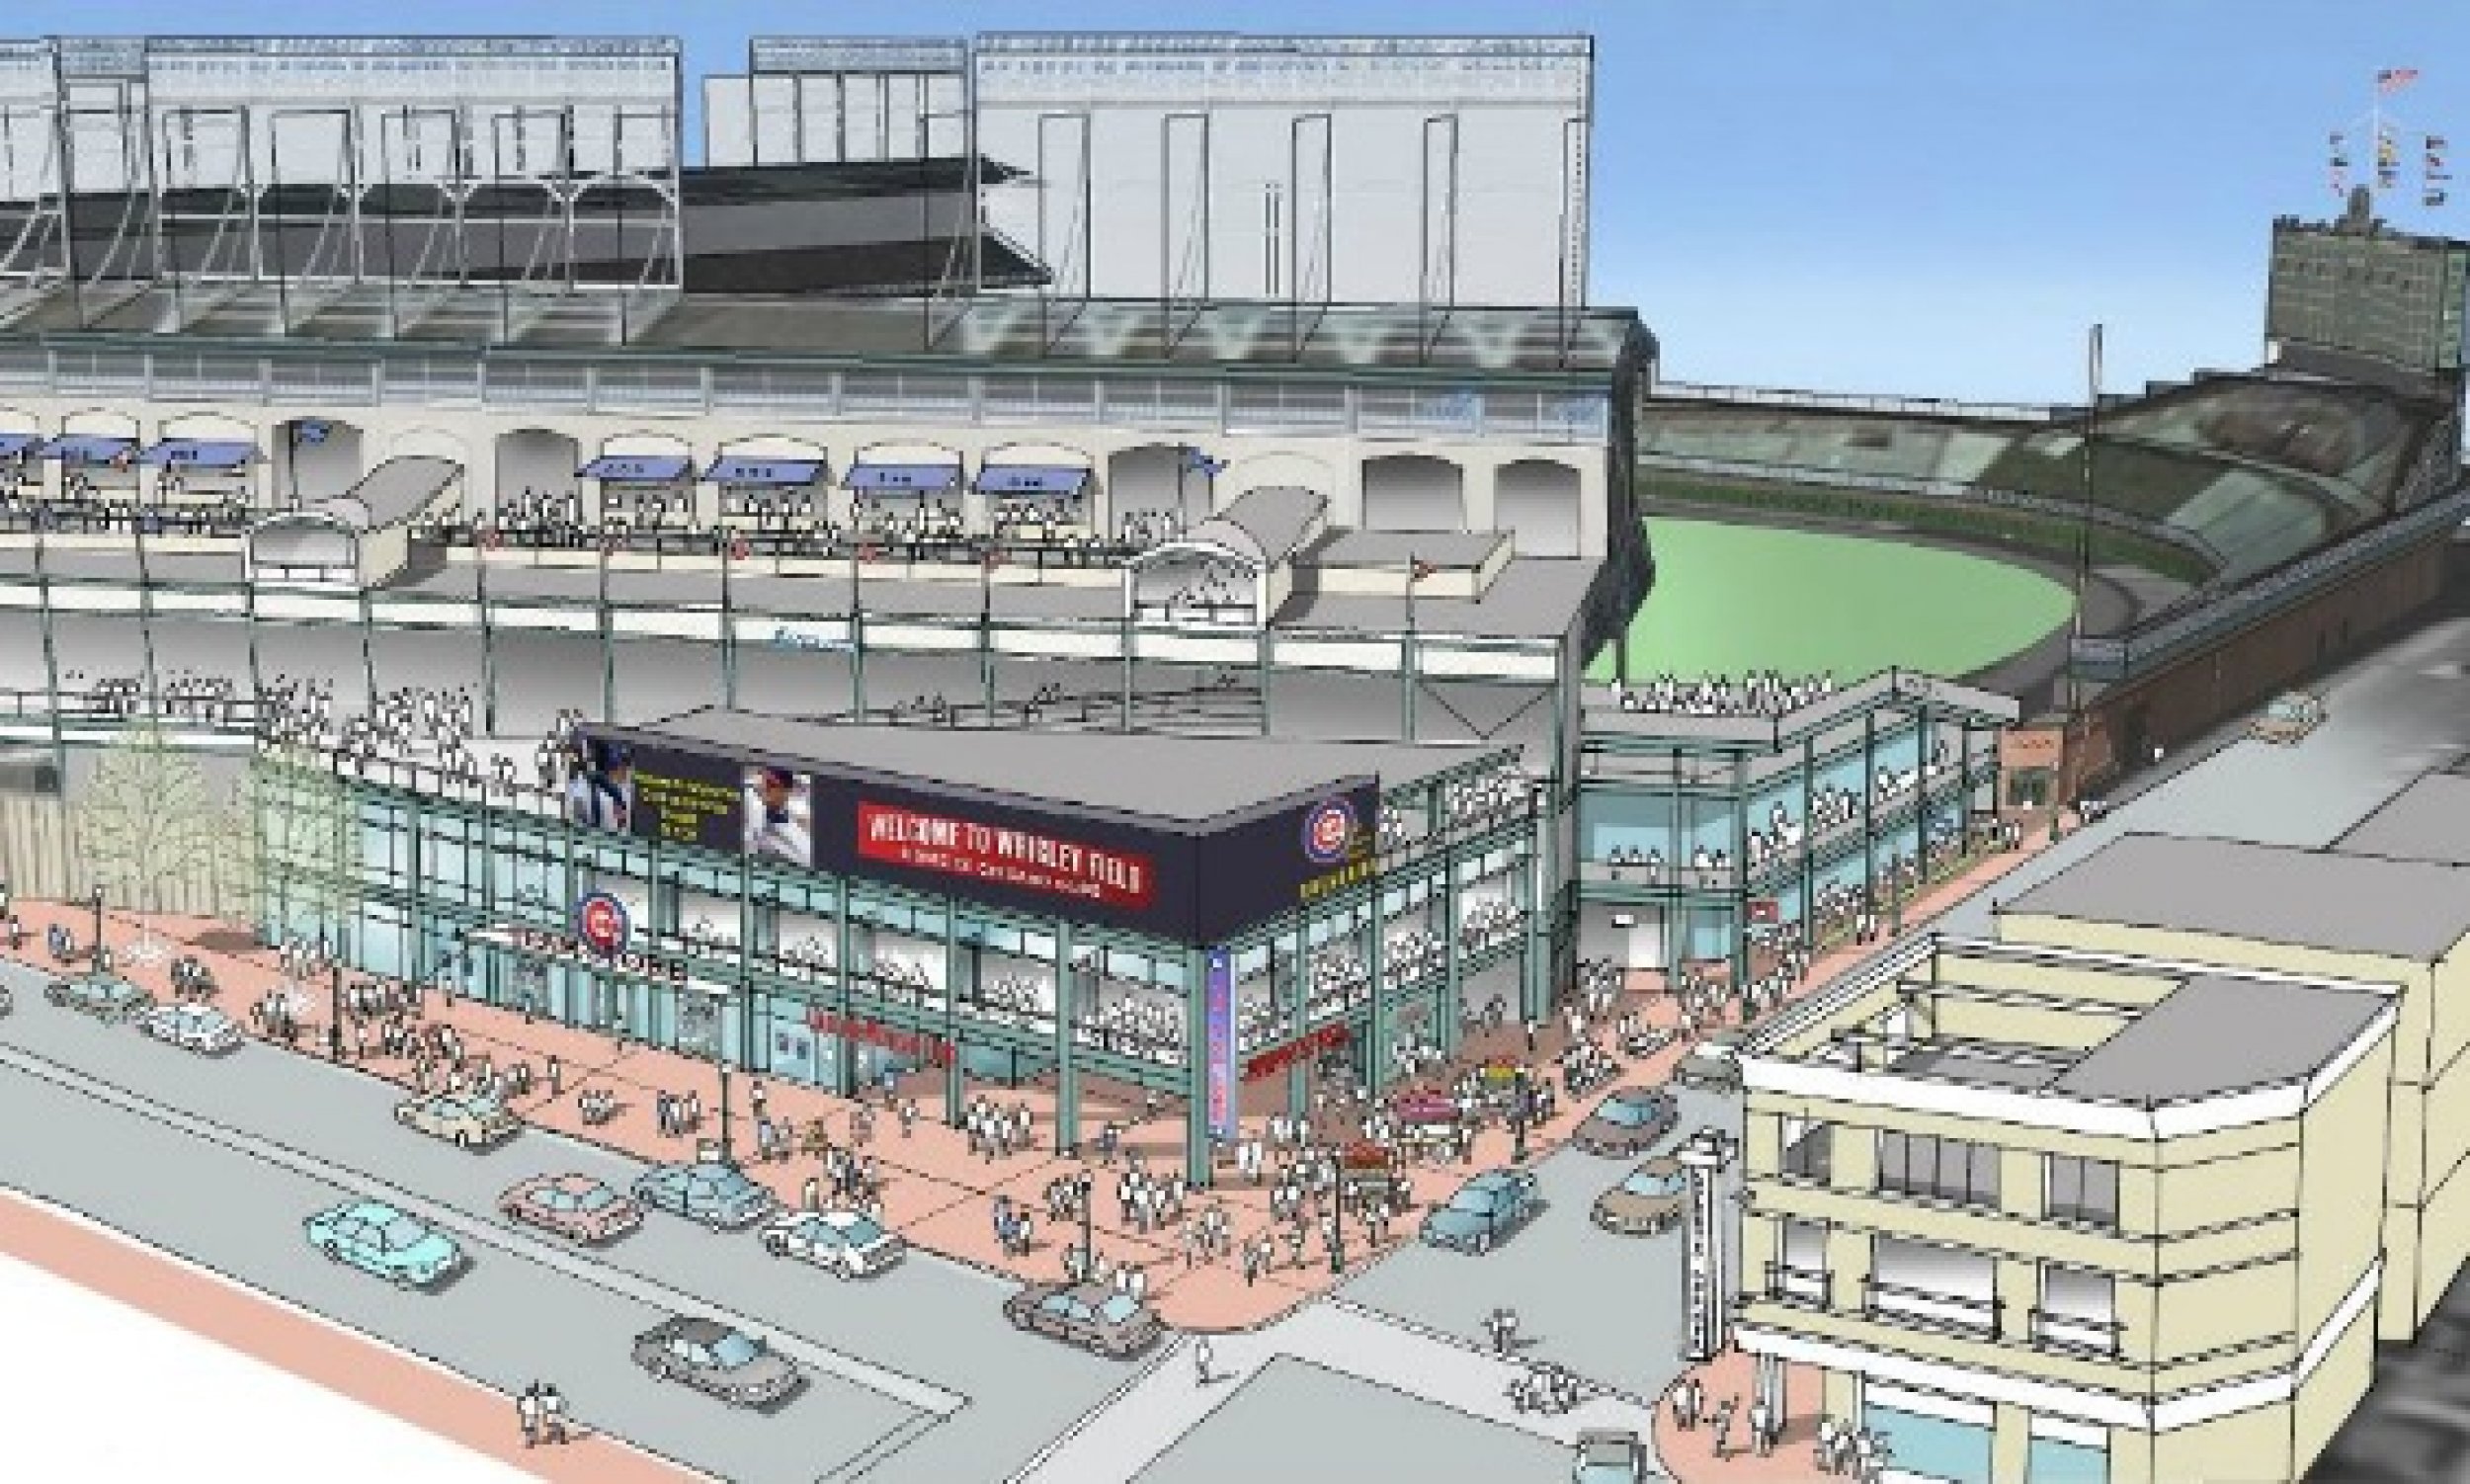 Wrigley Field Renovation Plans To Include New Player Clubhouse And